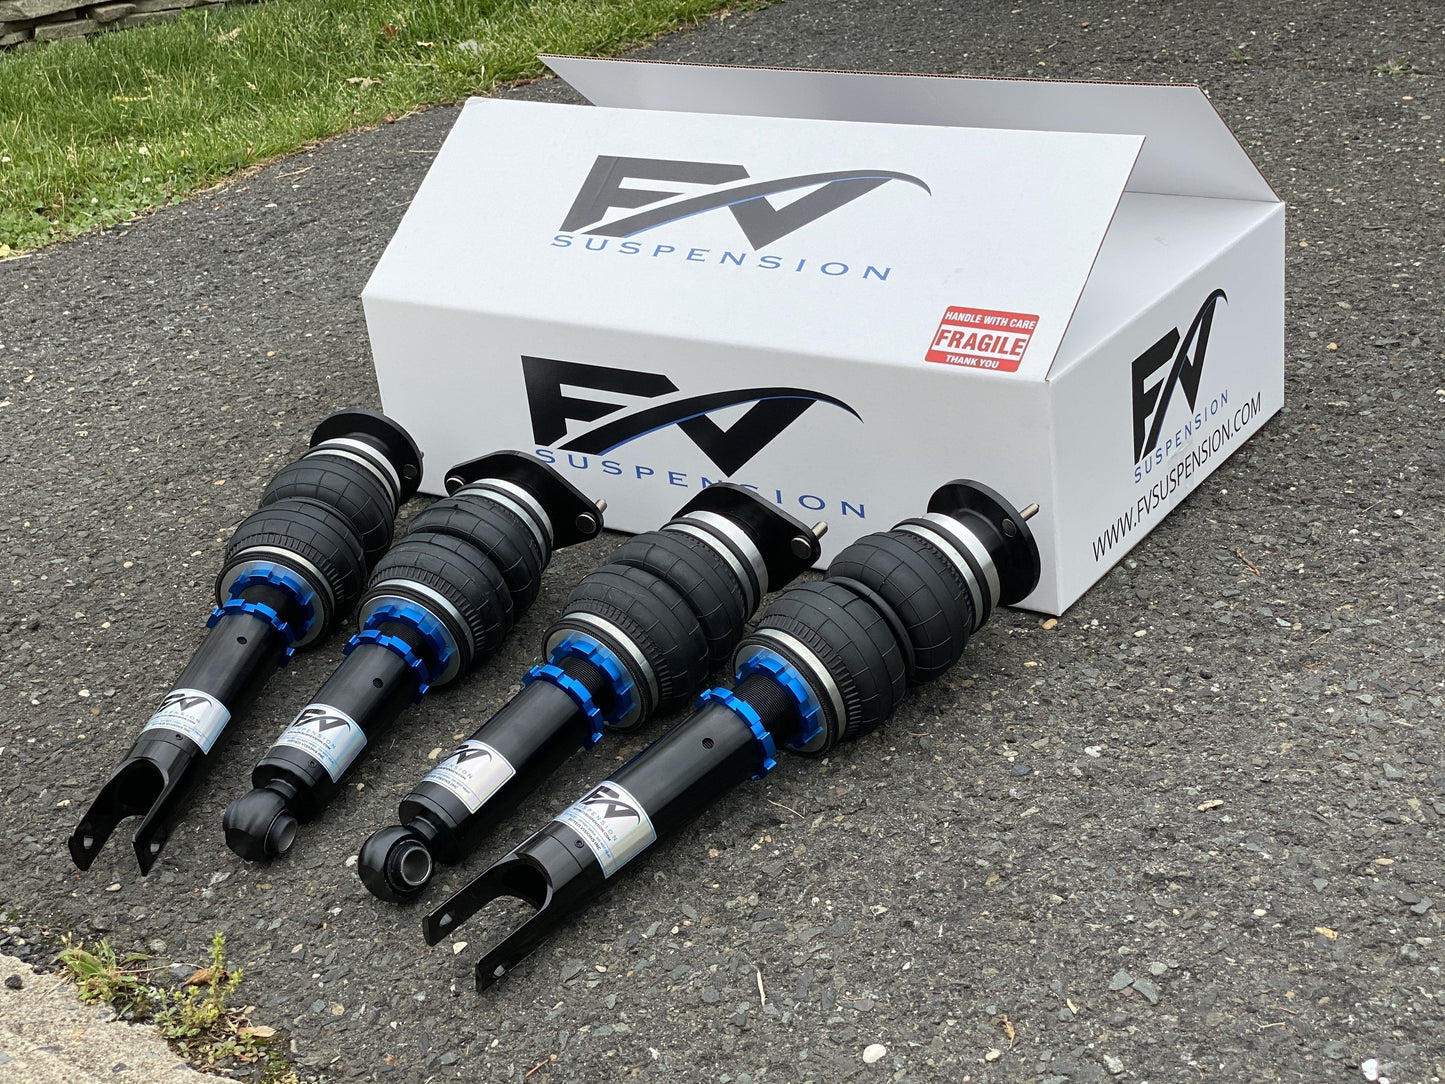 FV Suspension 3H Tier 3 Complete Air Ride kit for 08-13 Cadillac CTS - FVALtier3kit156